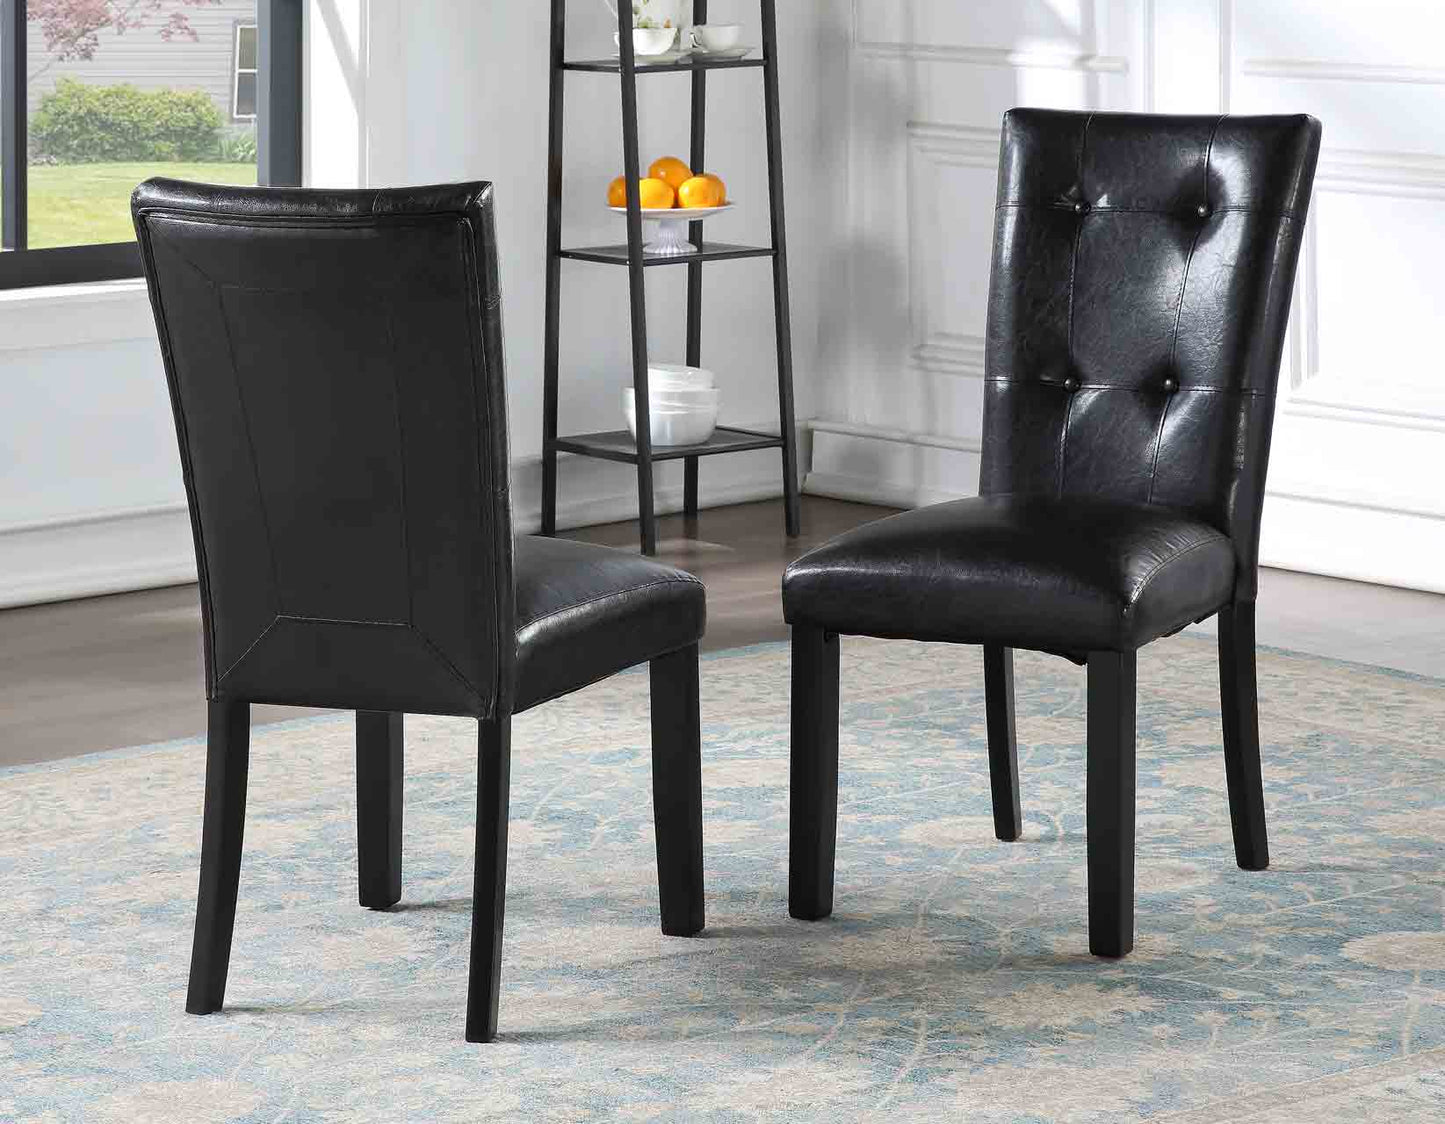 Sterling 5 Piece Faux-Marble Top Dining
(Table & 4 Side Chairs)